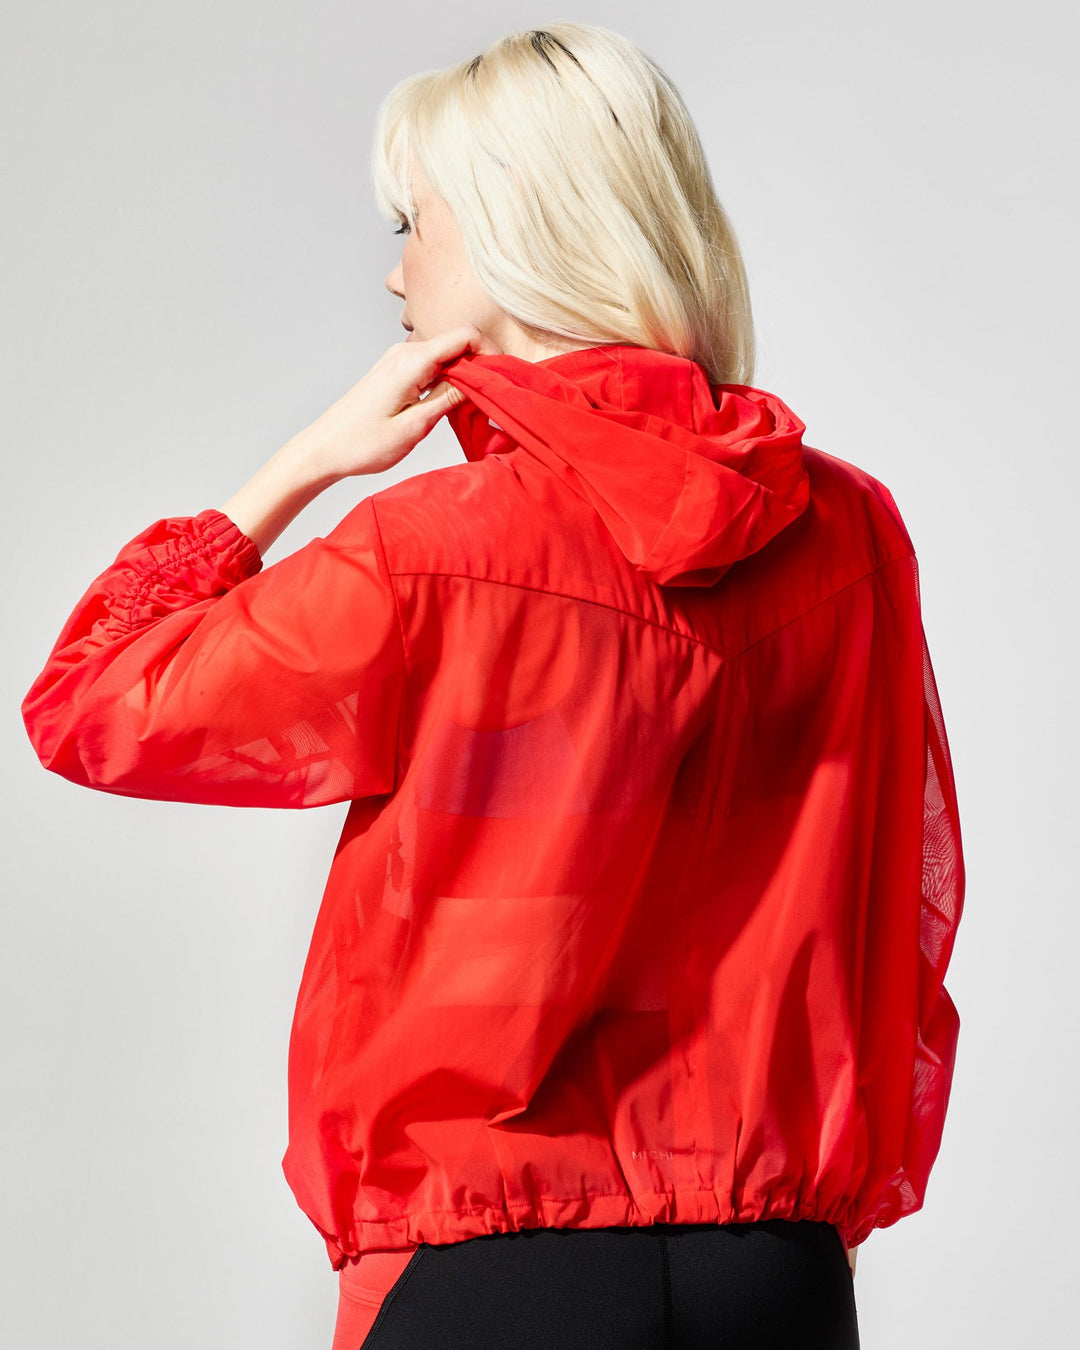 MICHI - Indy Jacket in Fire Red